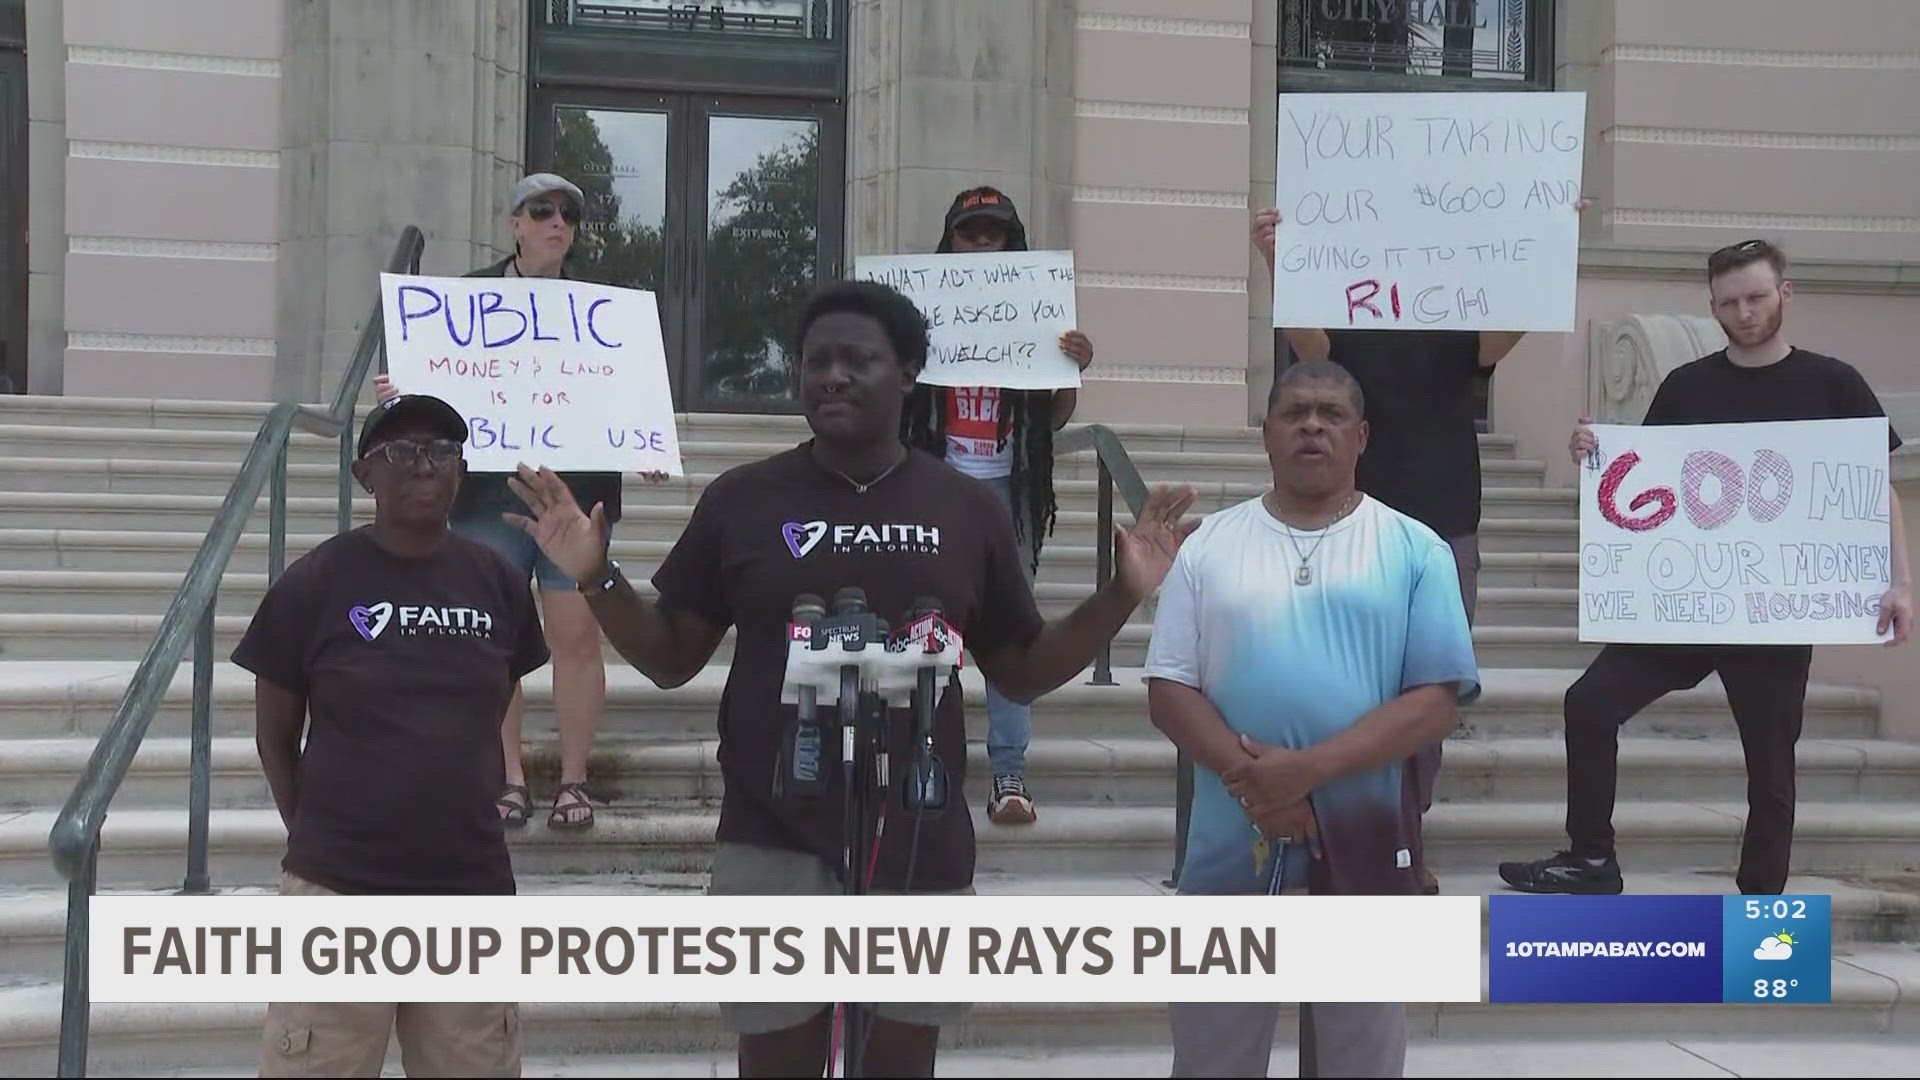 Protestors made sure to push back on the plan by demonstrating outside St. Pete City Hall during the big announcement.